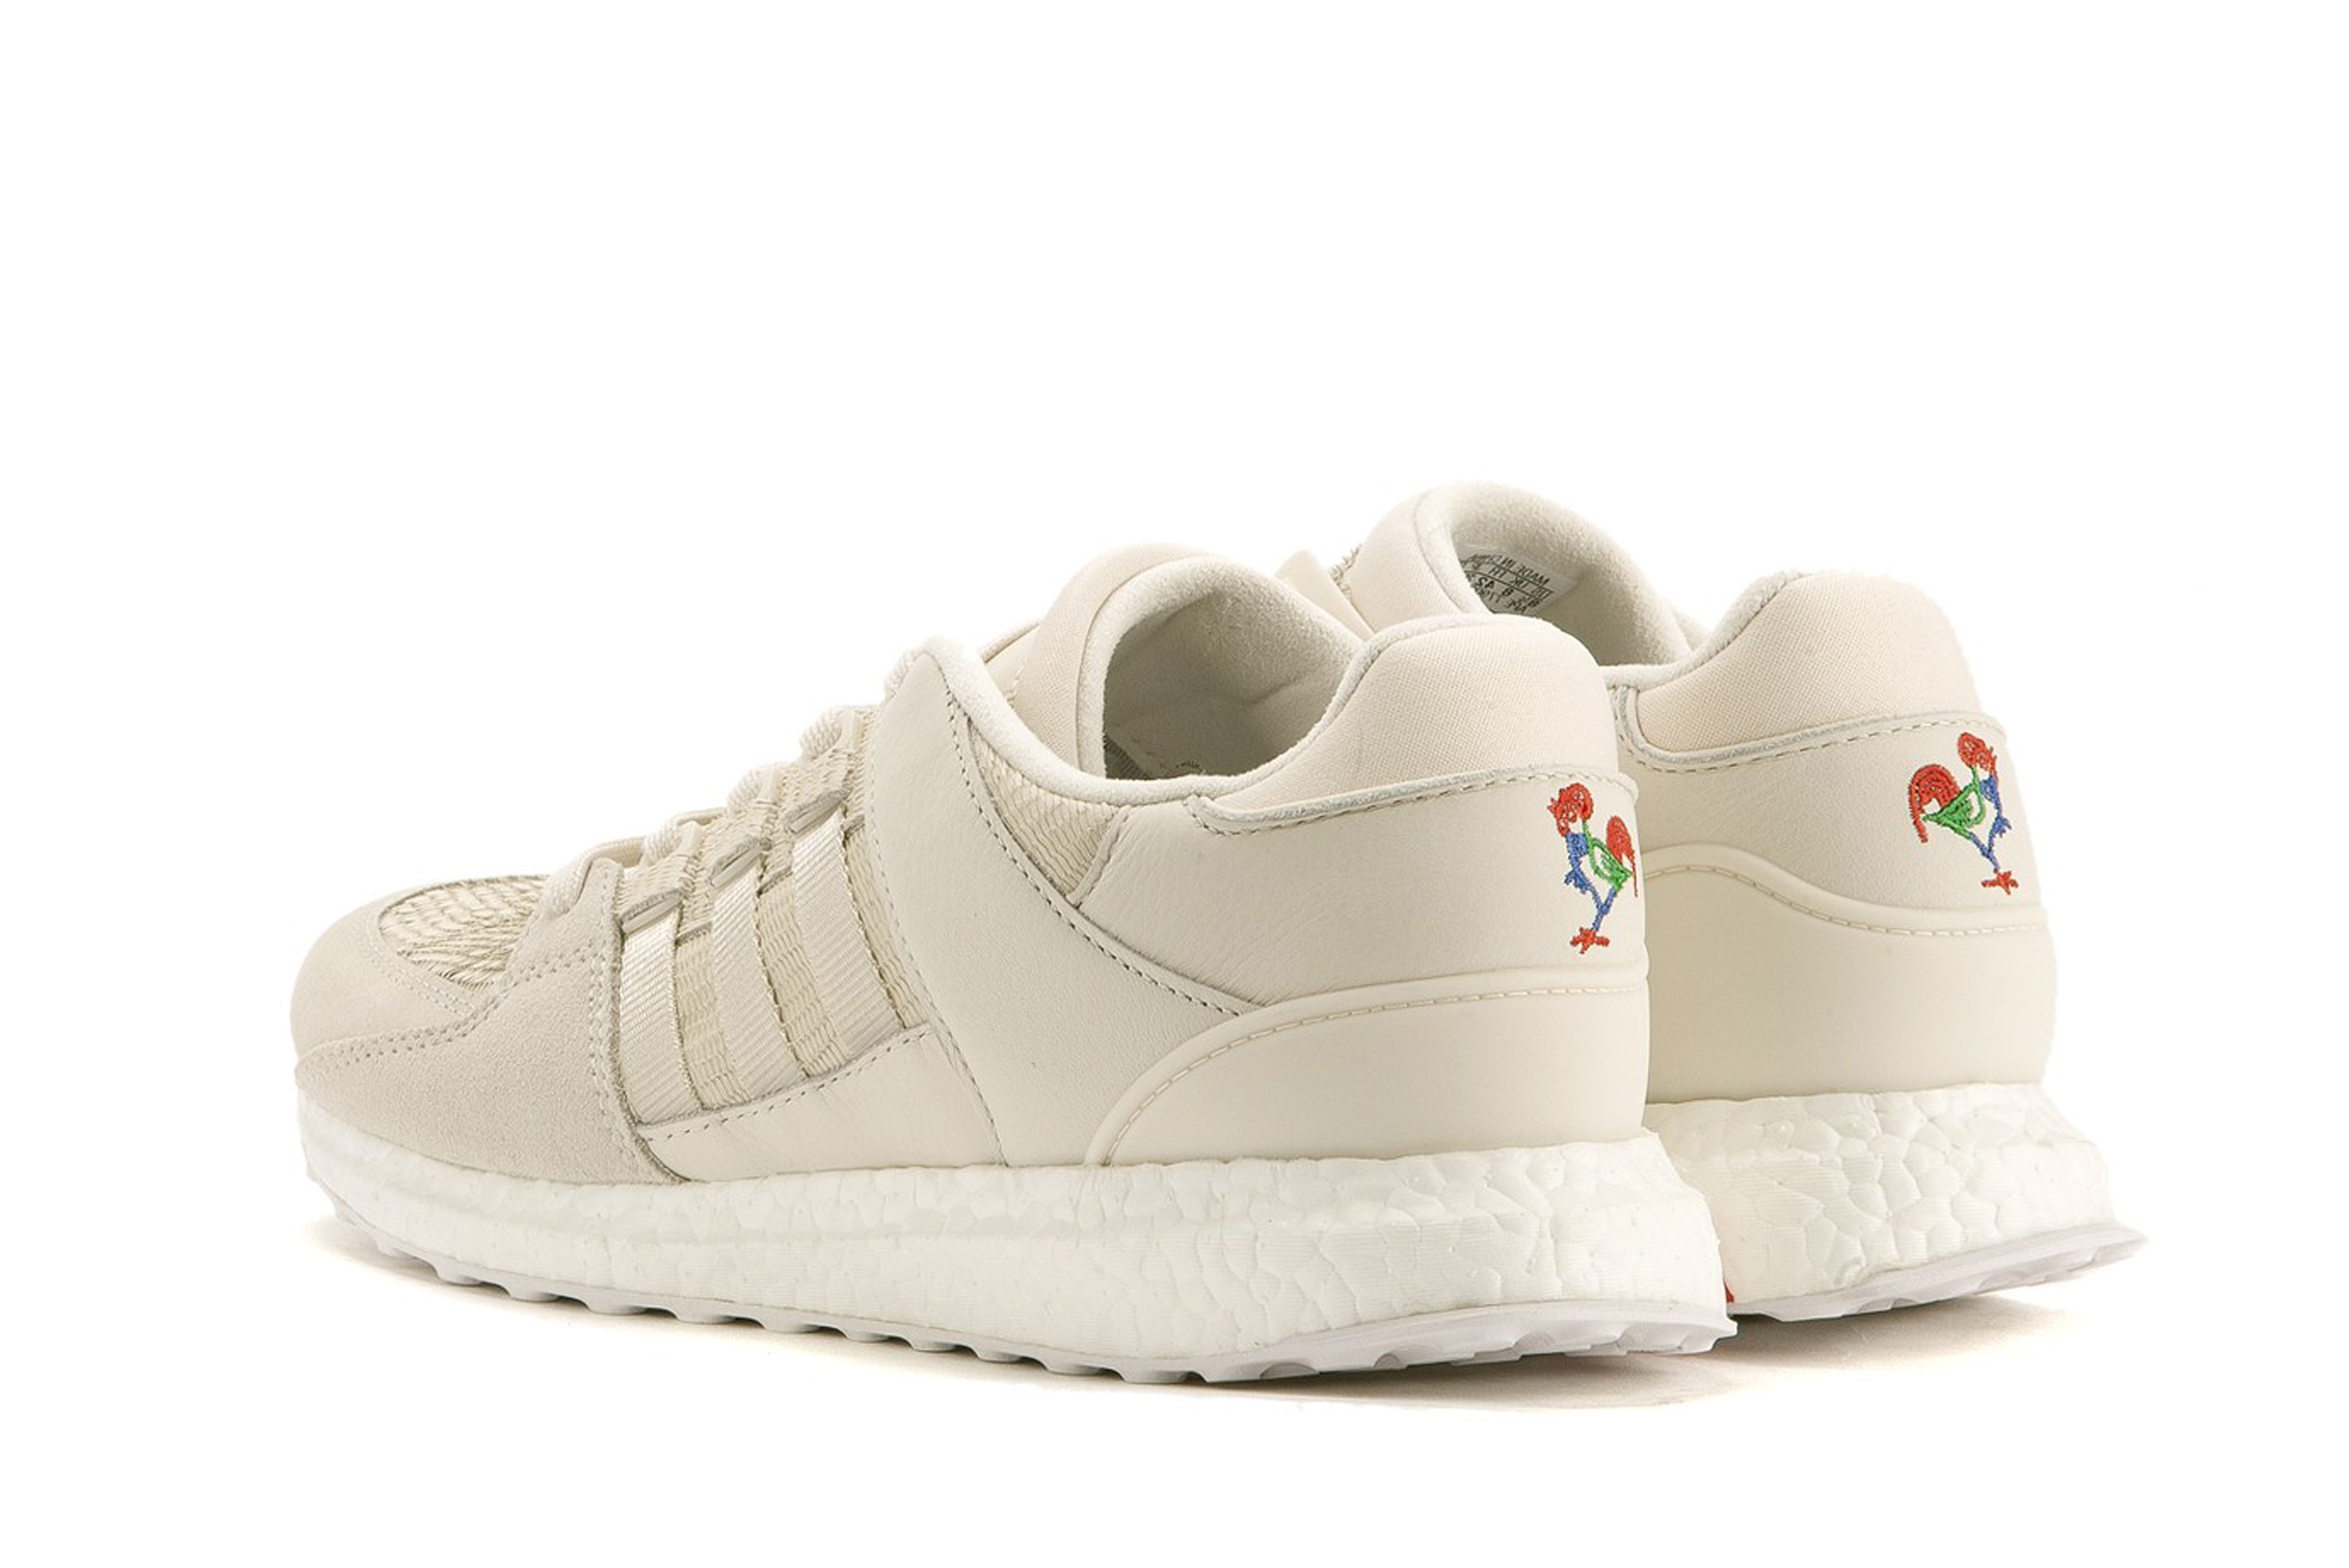 adidas originals EQT Support Ultra 'Chinese New Year' Sneakers White/Footwear